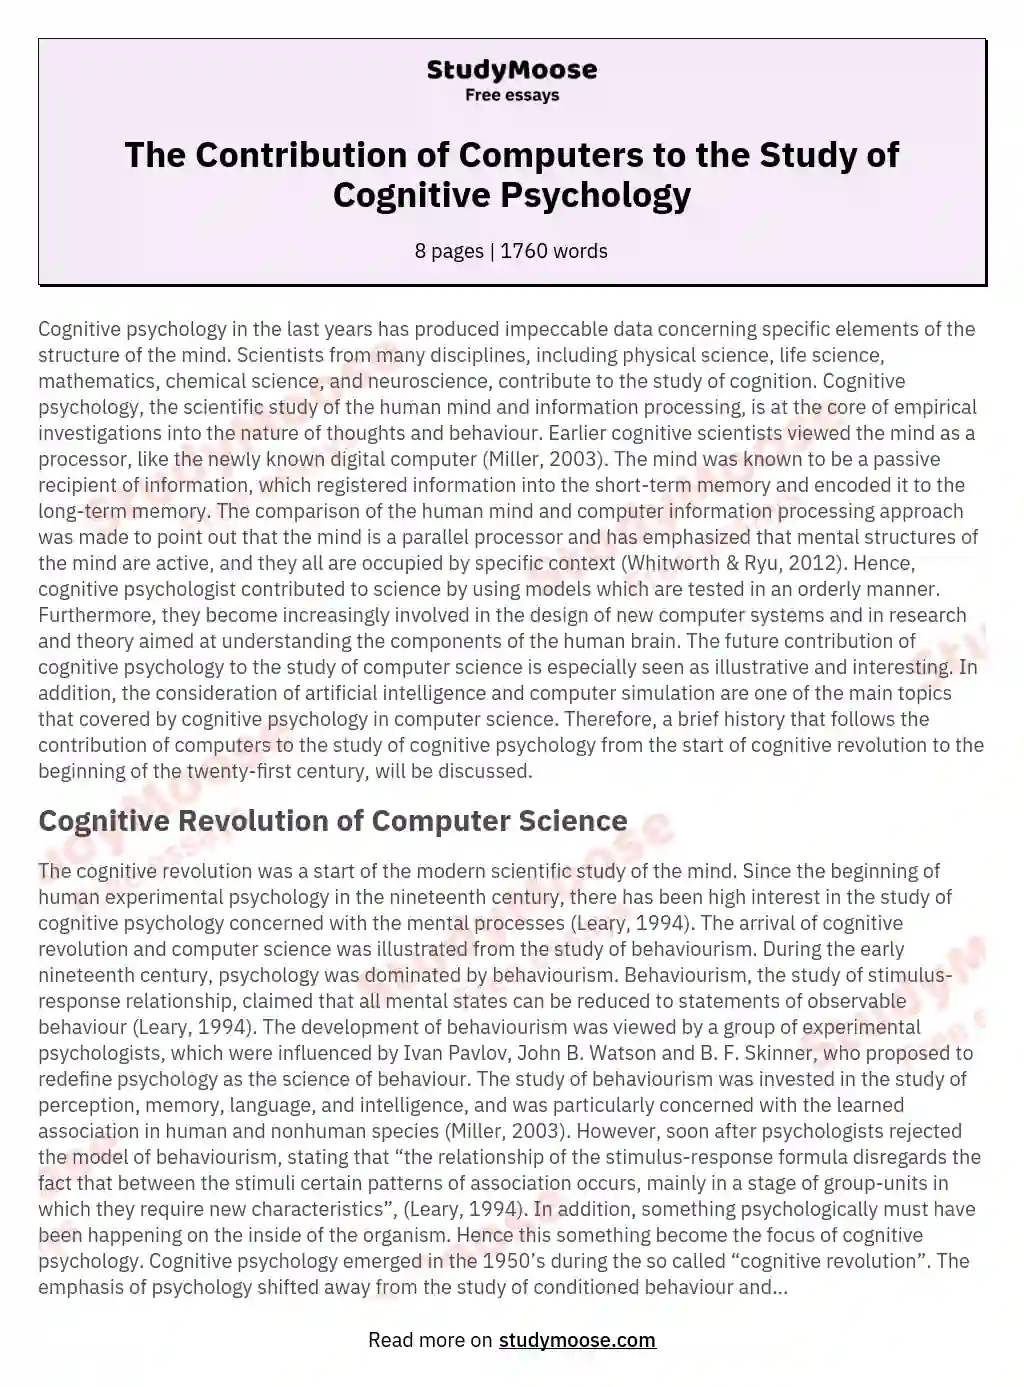 The Contribution of Computers to the Study of Cognitive Psychology